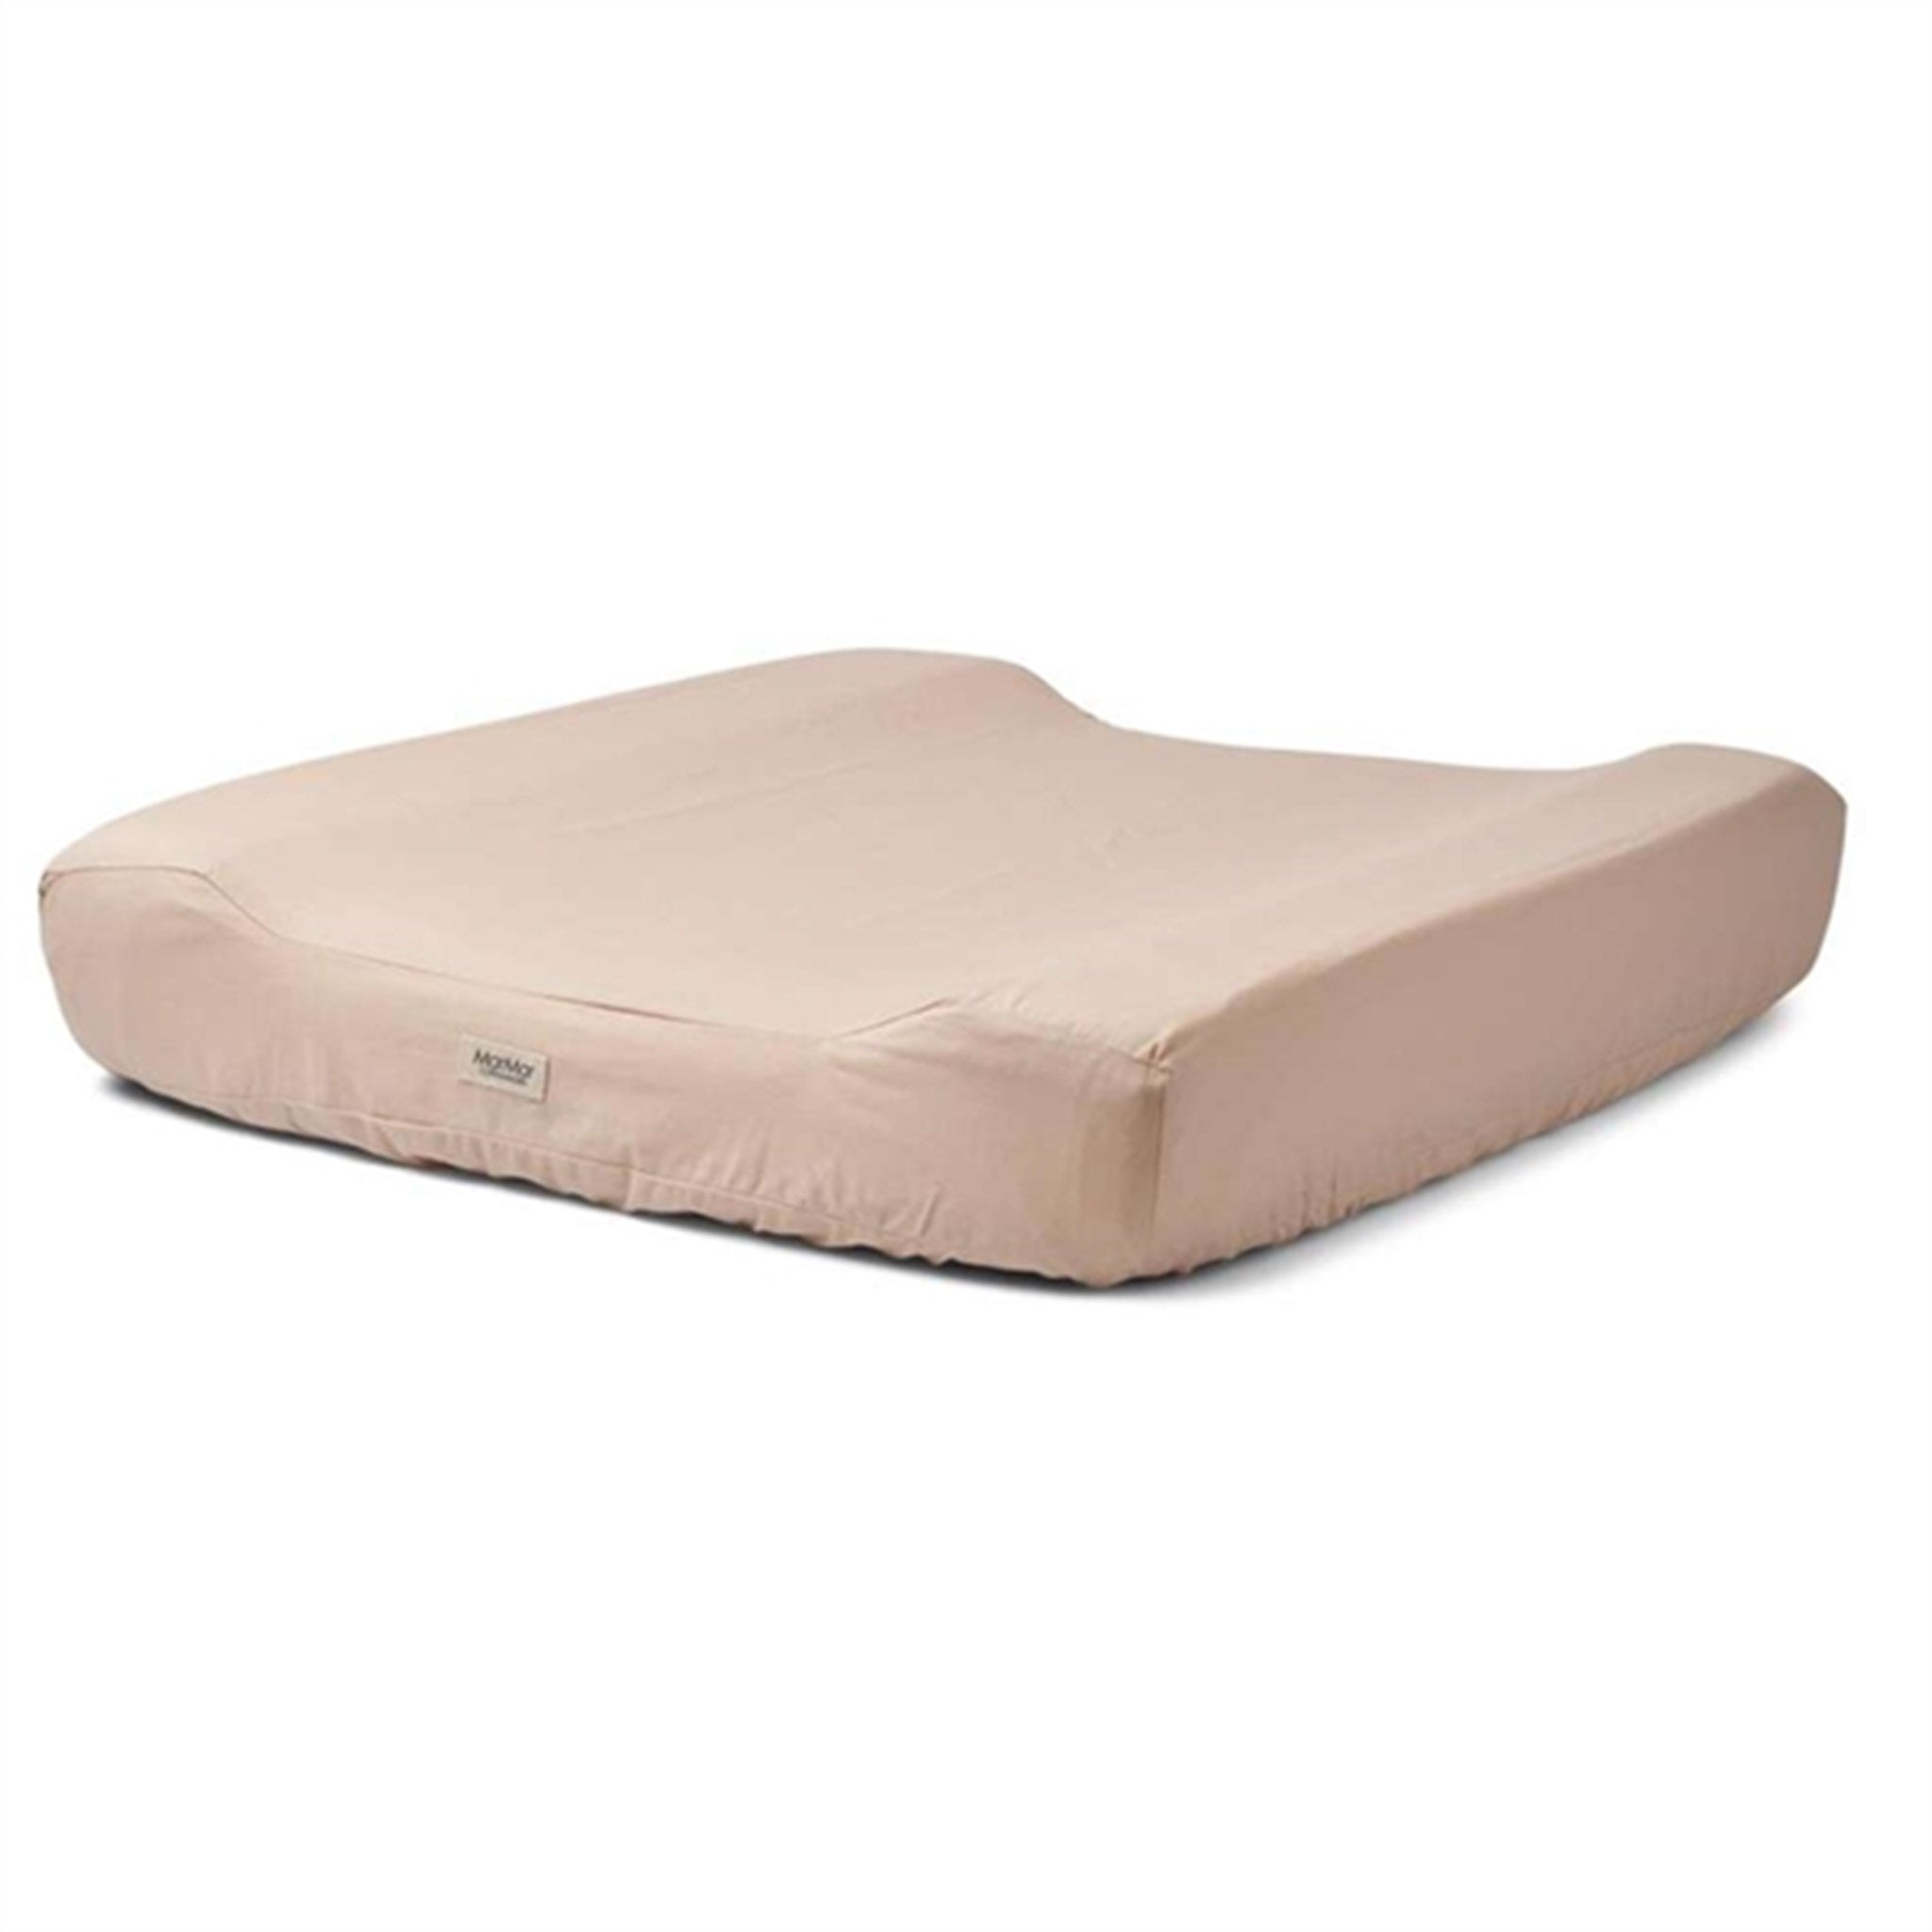 MarMar Changing Cushion Cover Beige Rose